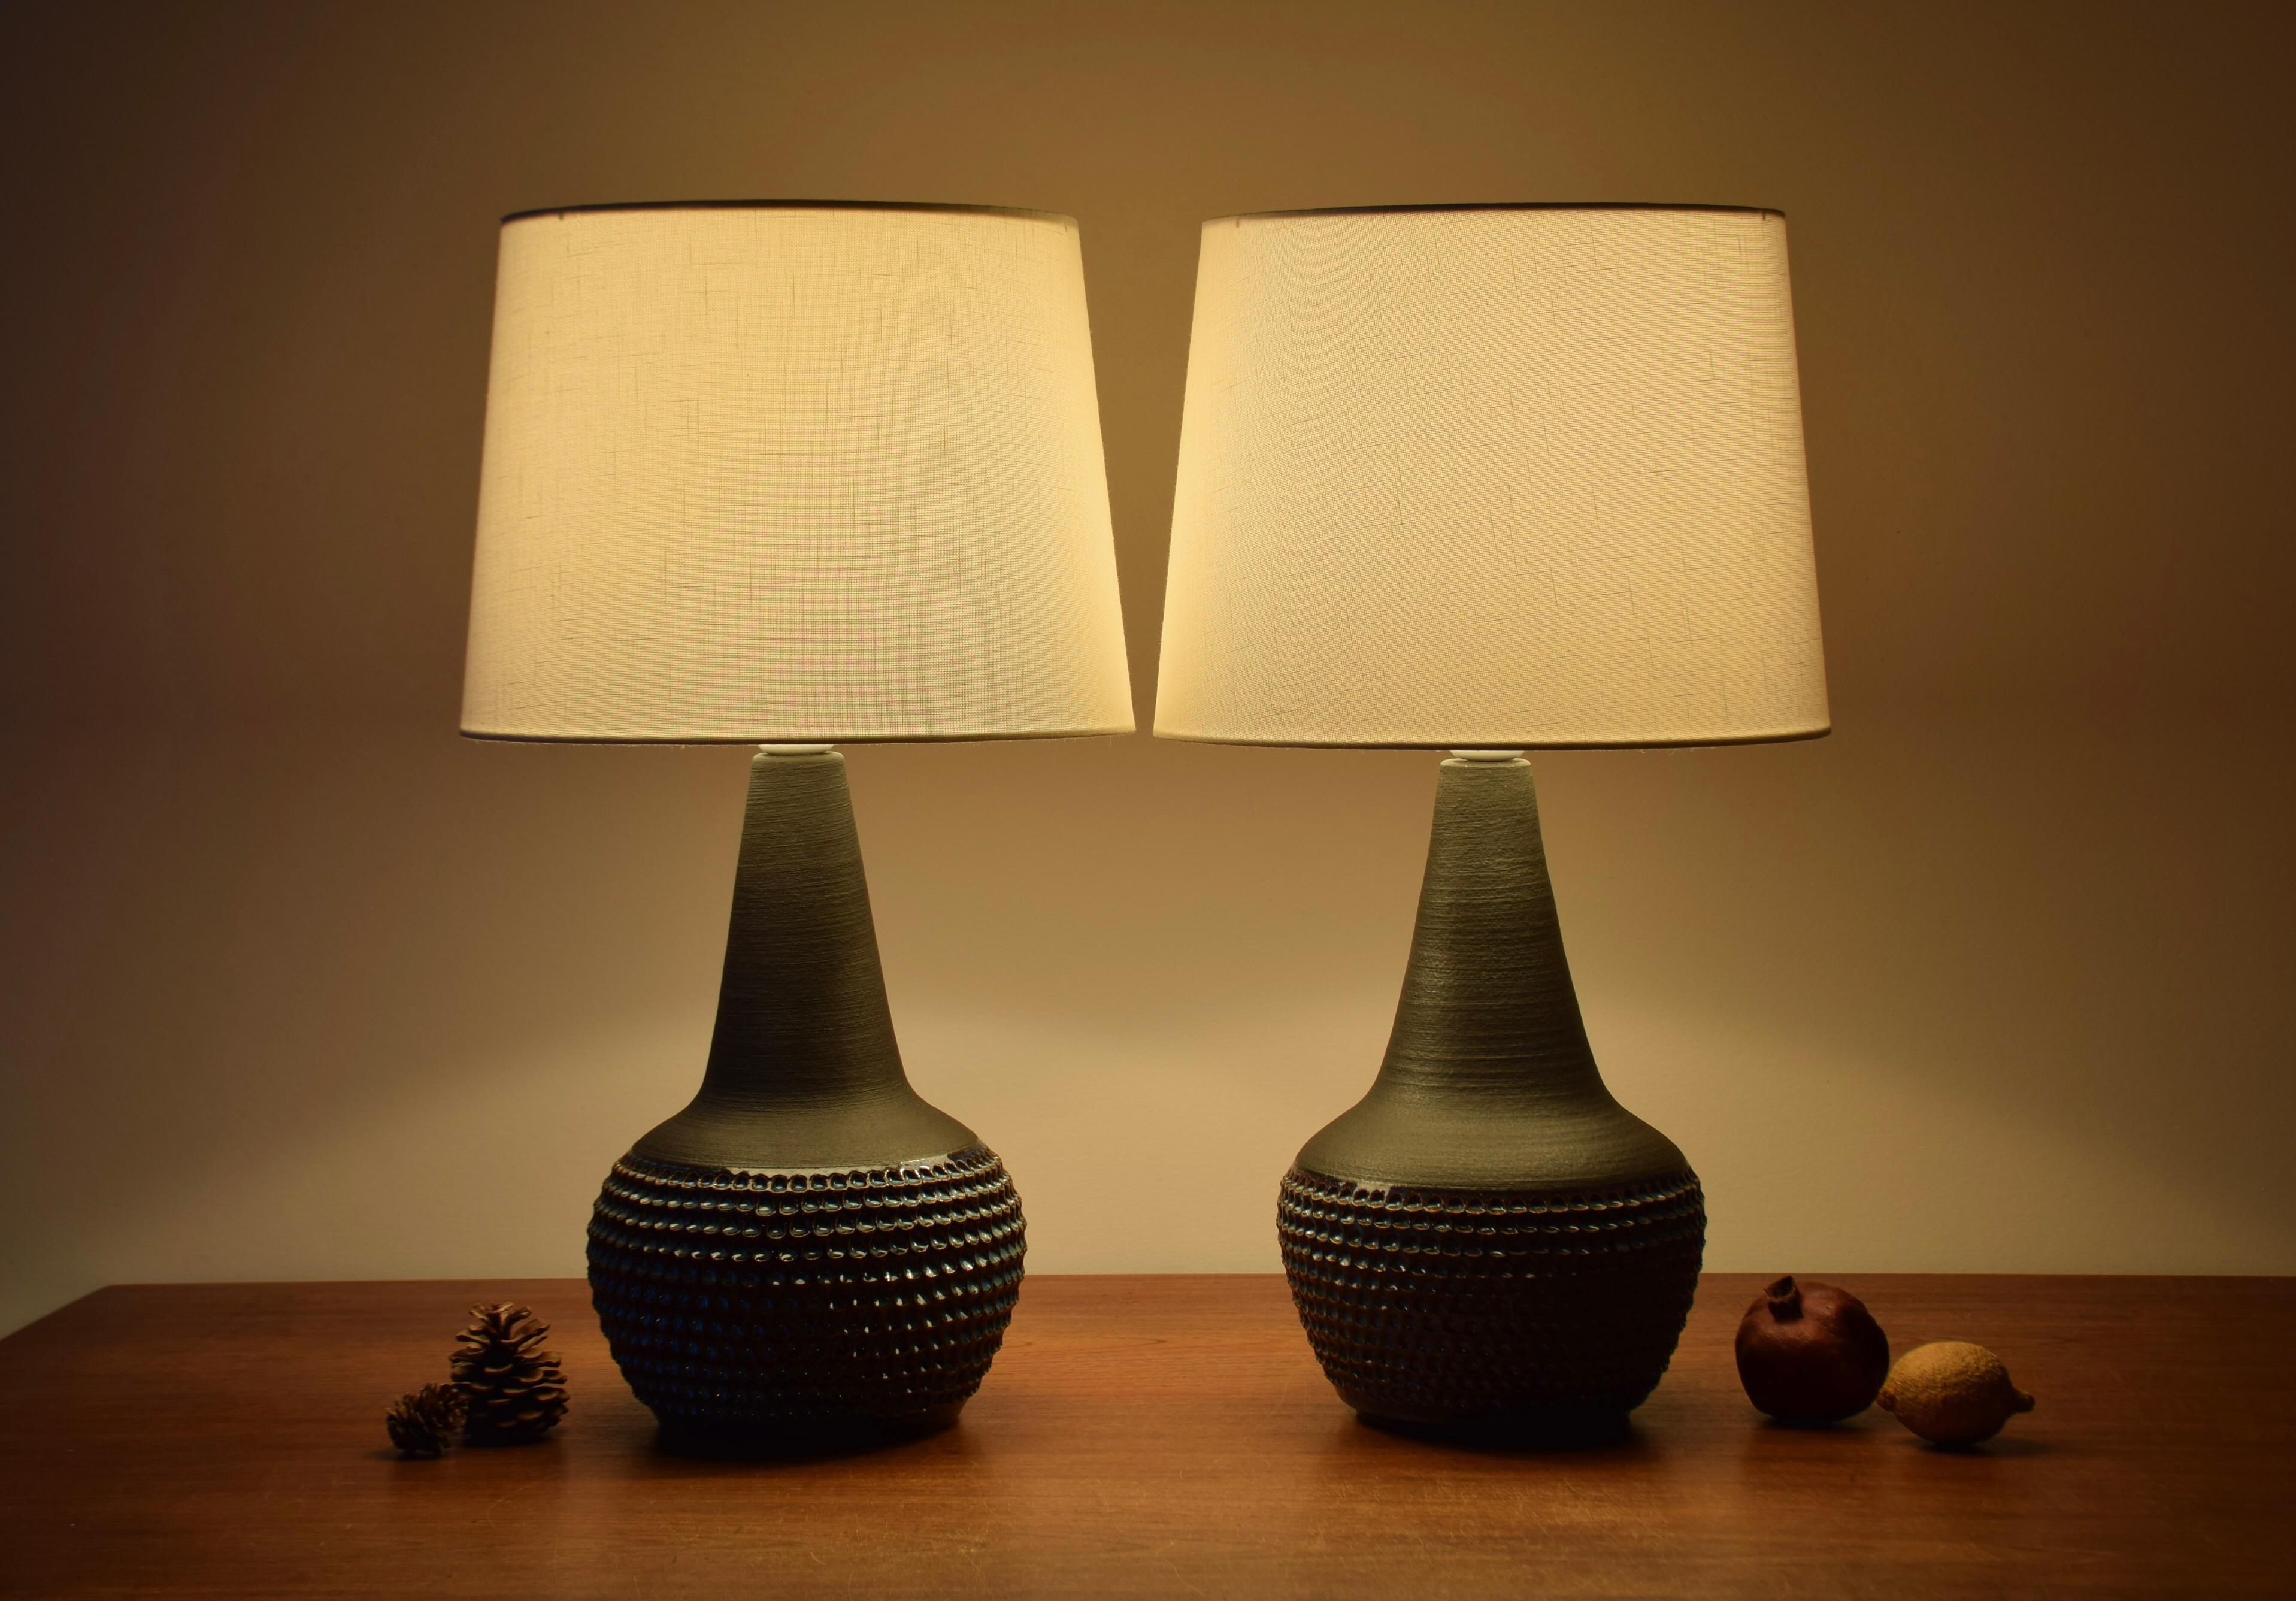 Pair of Midcentury Danish table lamps designed by Einar Johansen for Danish stoneware manufacturer Søholm. Manufactured circa 1960s.

The lamps have a matte dark brown glaze on neck and shoulder contrasted by a textured surface and glossy bluish